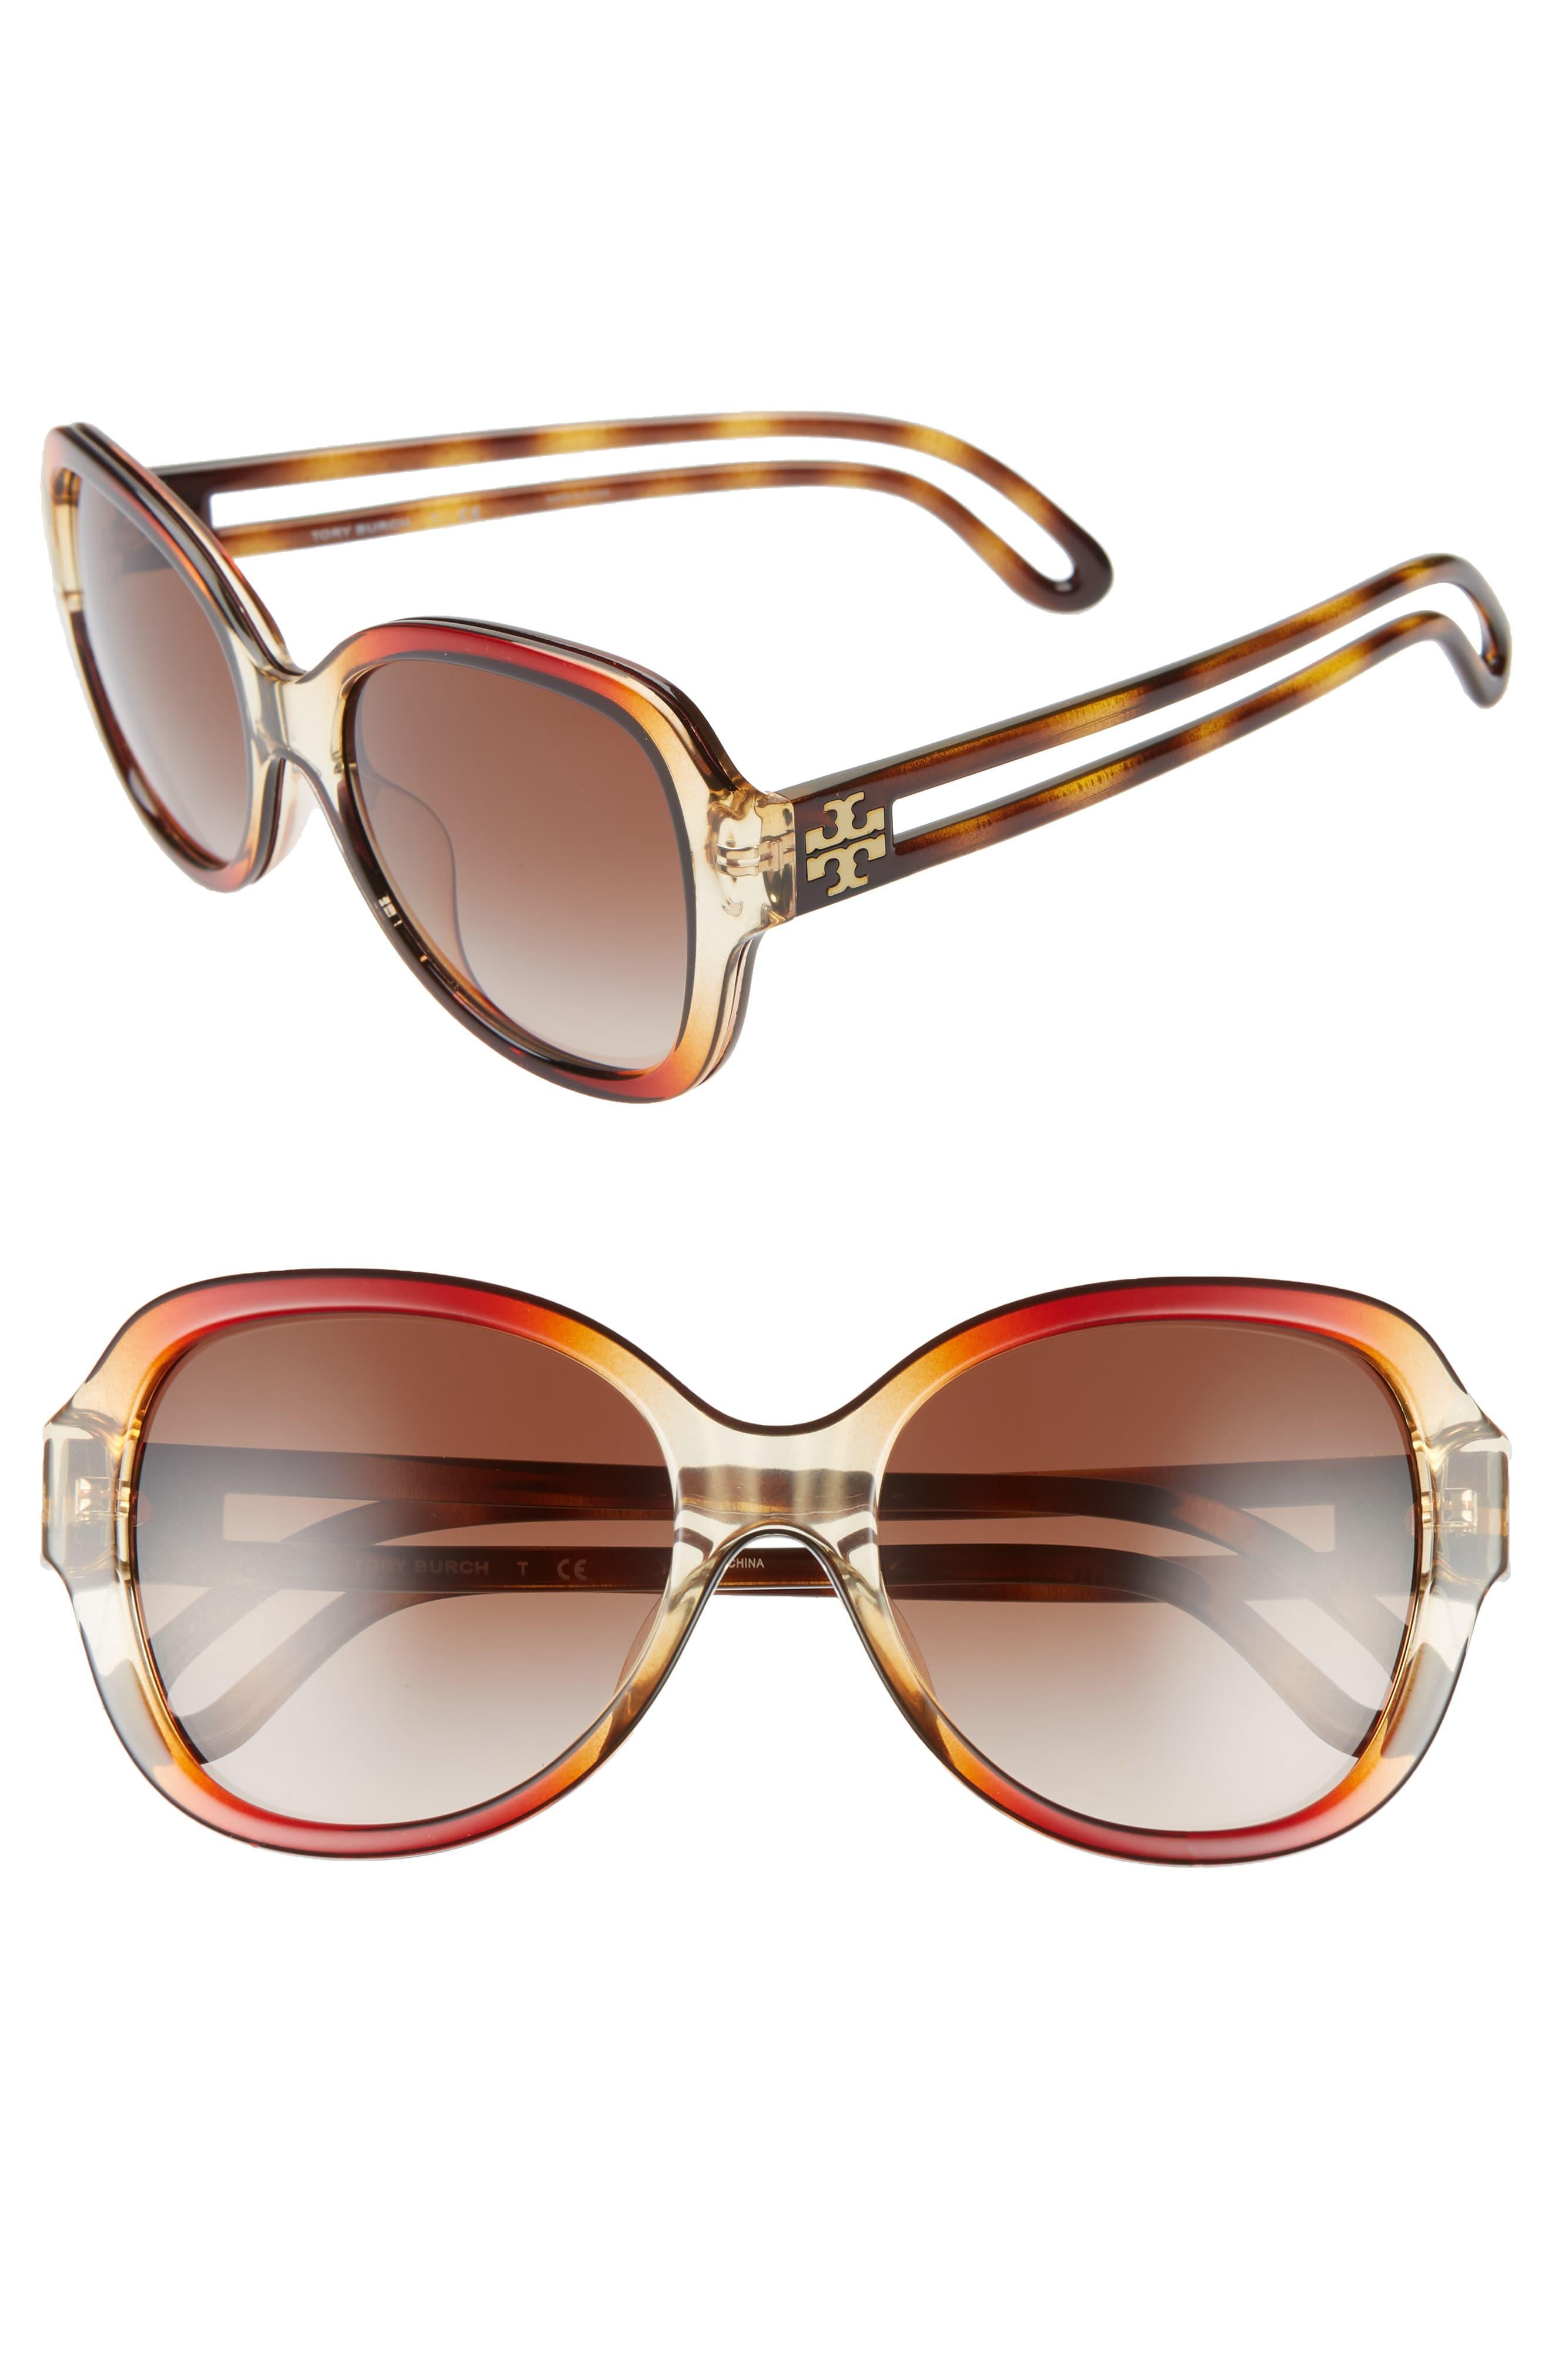 Tory Burch 55mm Gradient Butterfly Sunglasses - in Brown - Lyst